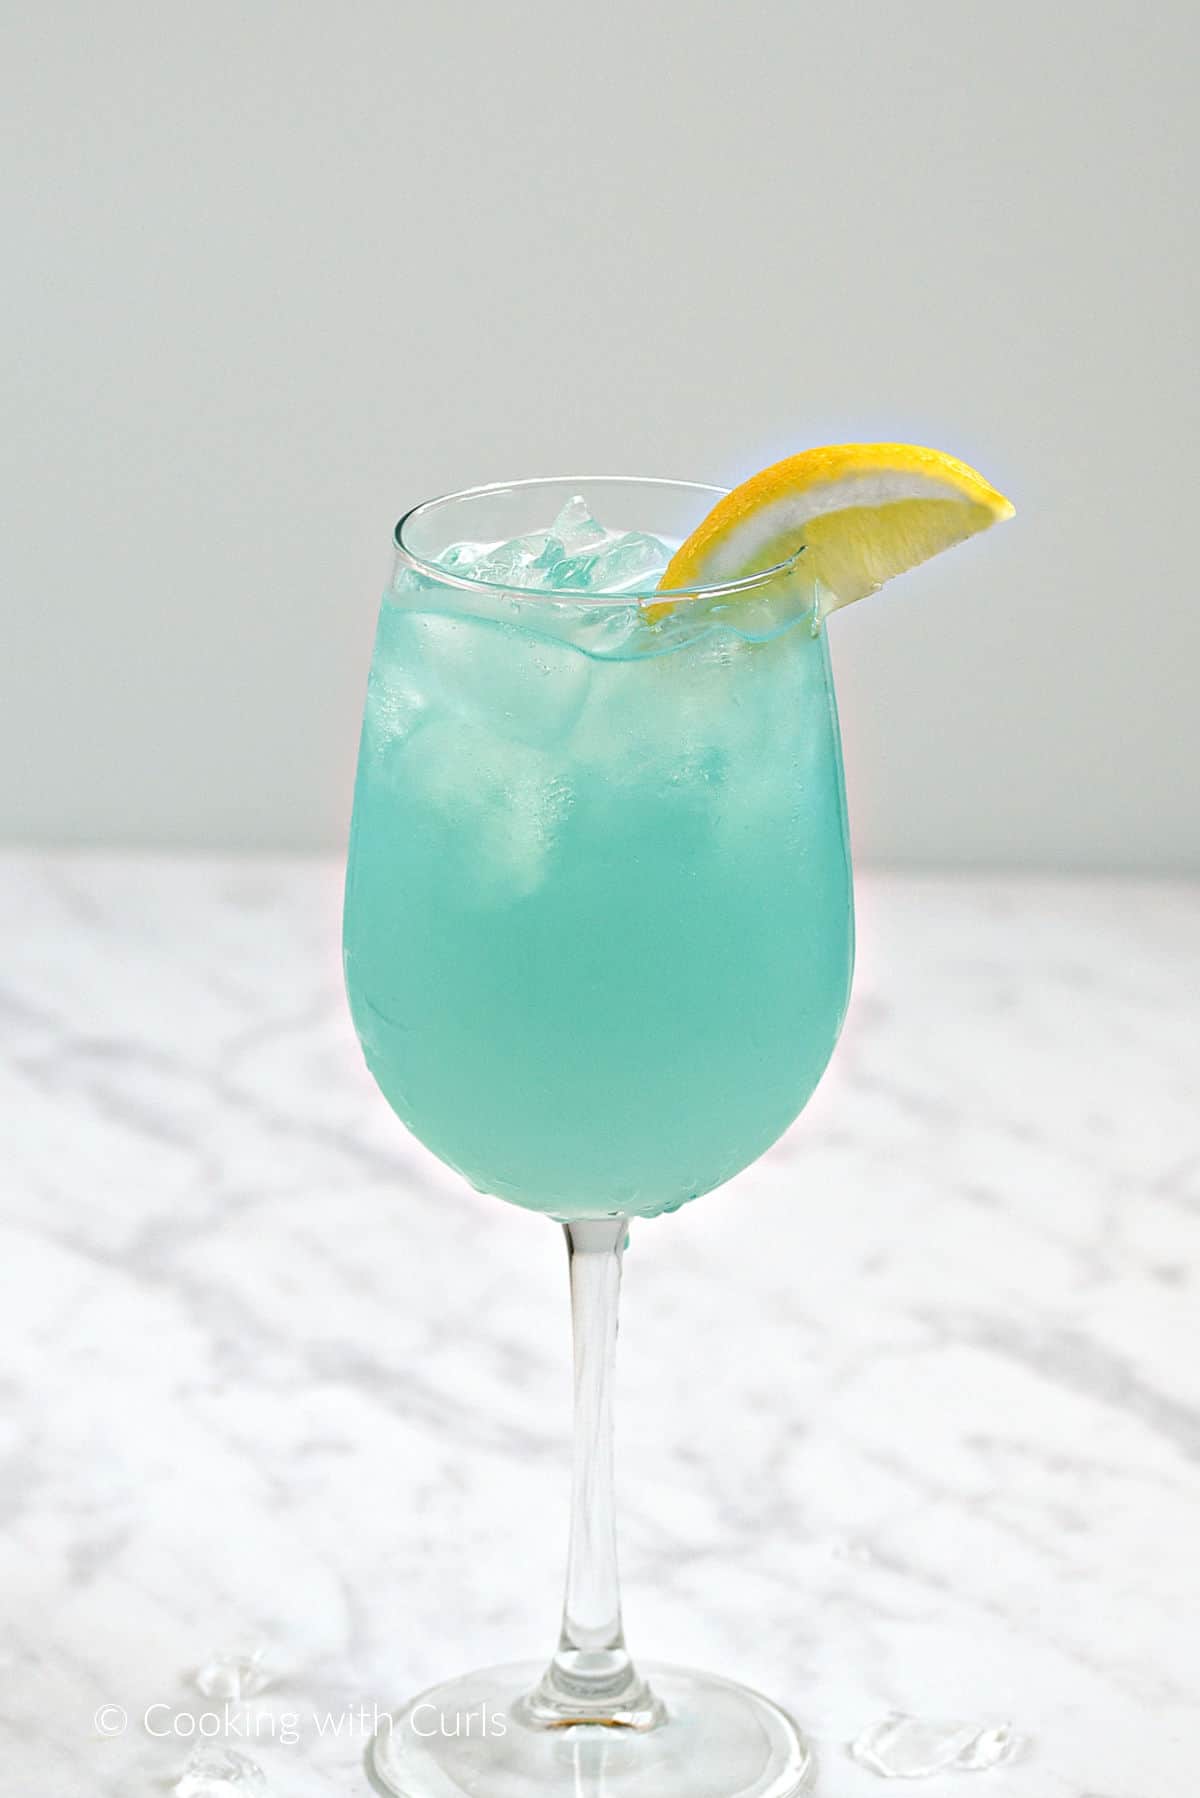 Teal blue cocktail with ice in a white wine glass with a lemon wedge garnish.